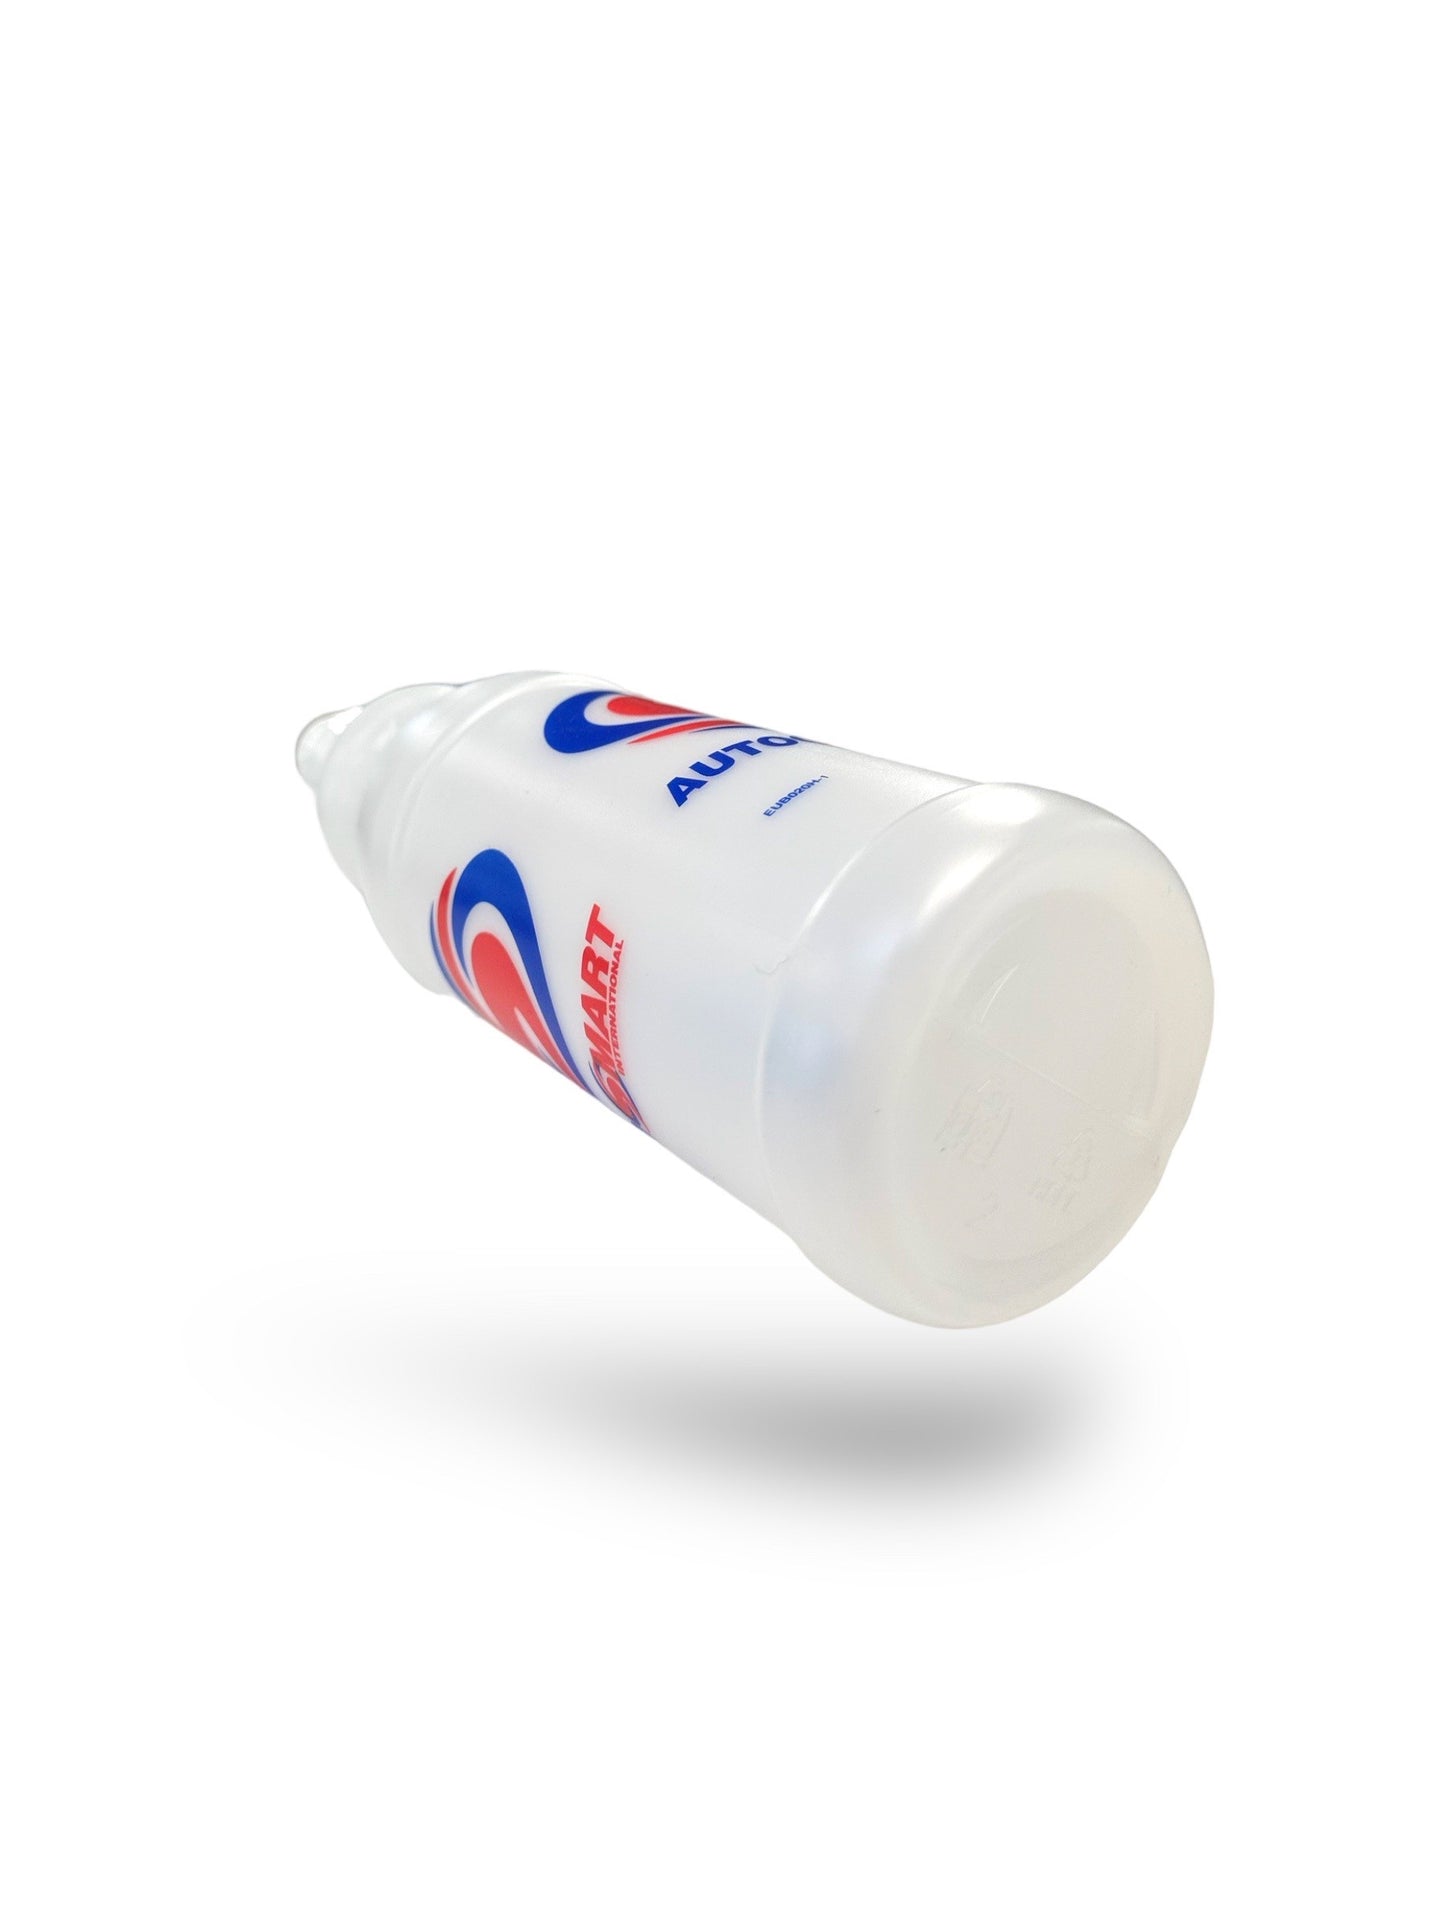 500ml Polish Bottle DispenserAutosmart Polish Bottle Dispenser is sized for maximum ergonomics while dispensing liquids for ease of use. It's HDPE plastic is resistant to most detail chemicals. Included with a push pull cap, this enables product to be sea